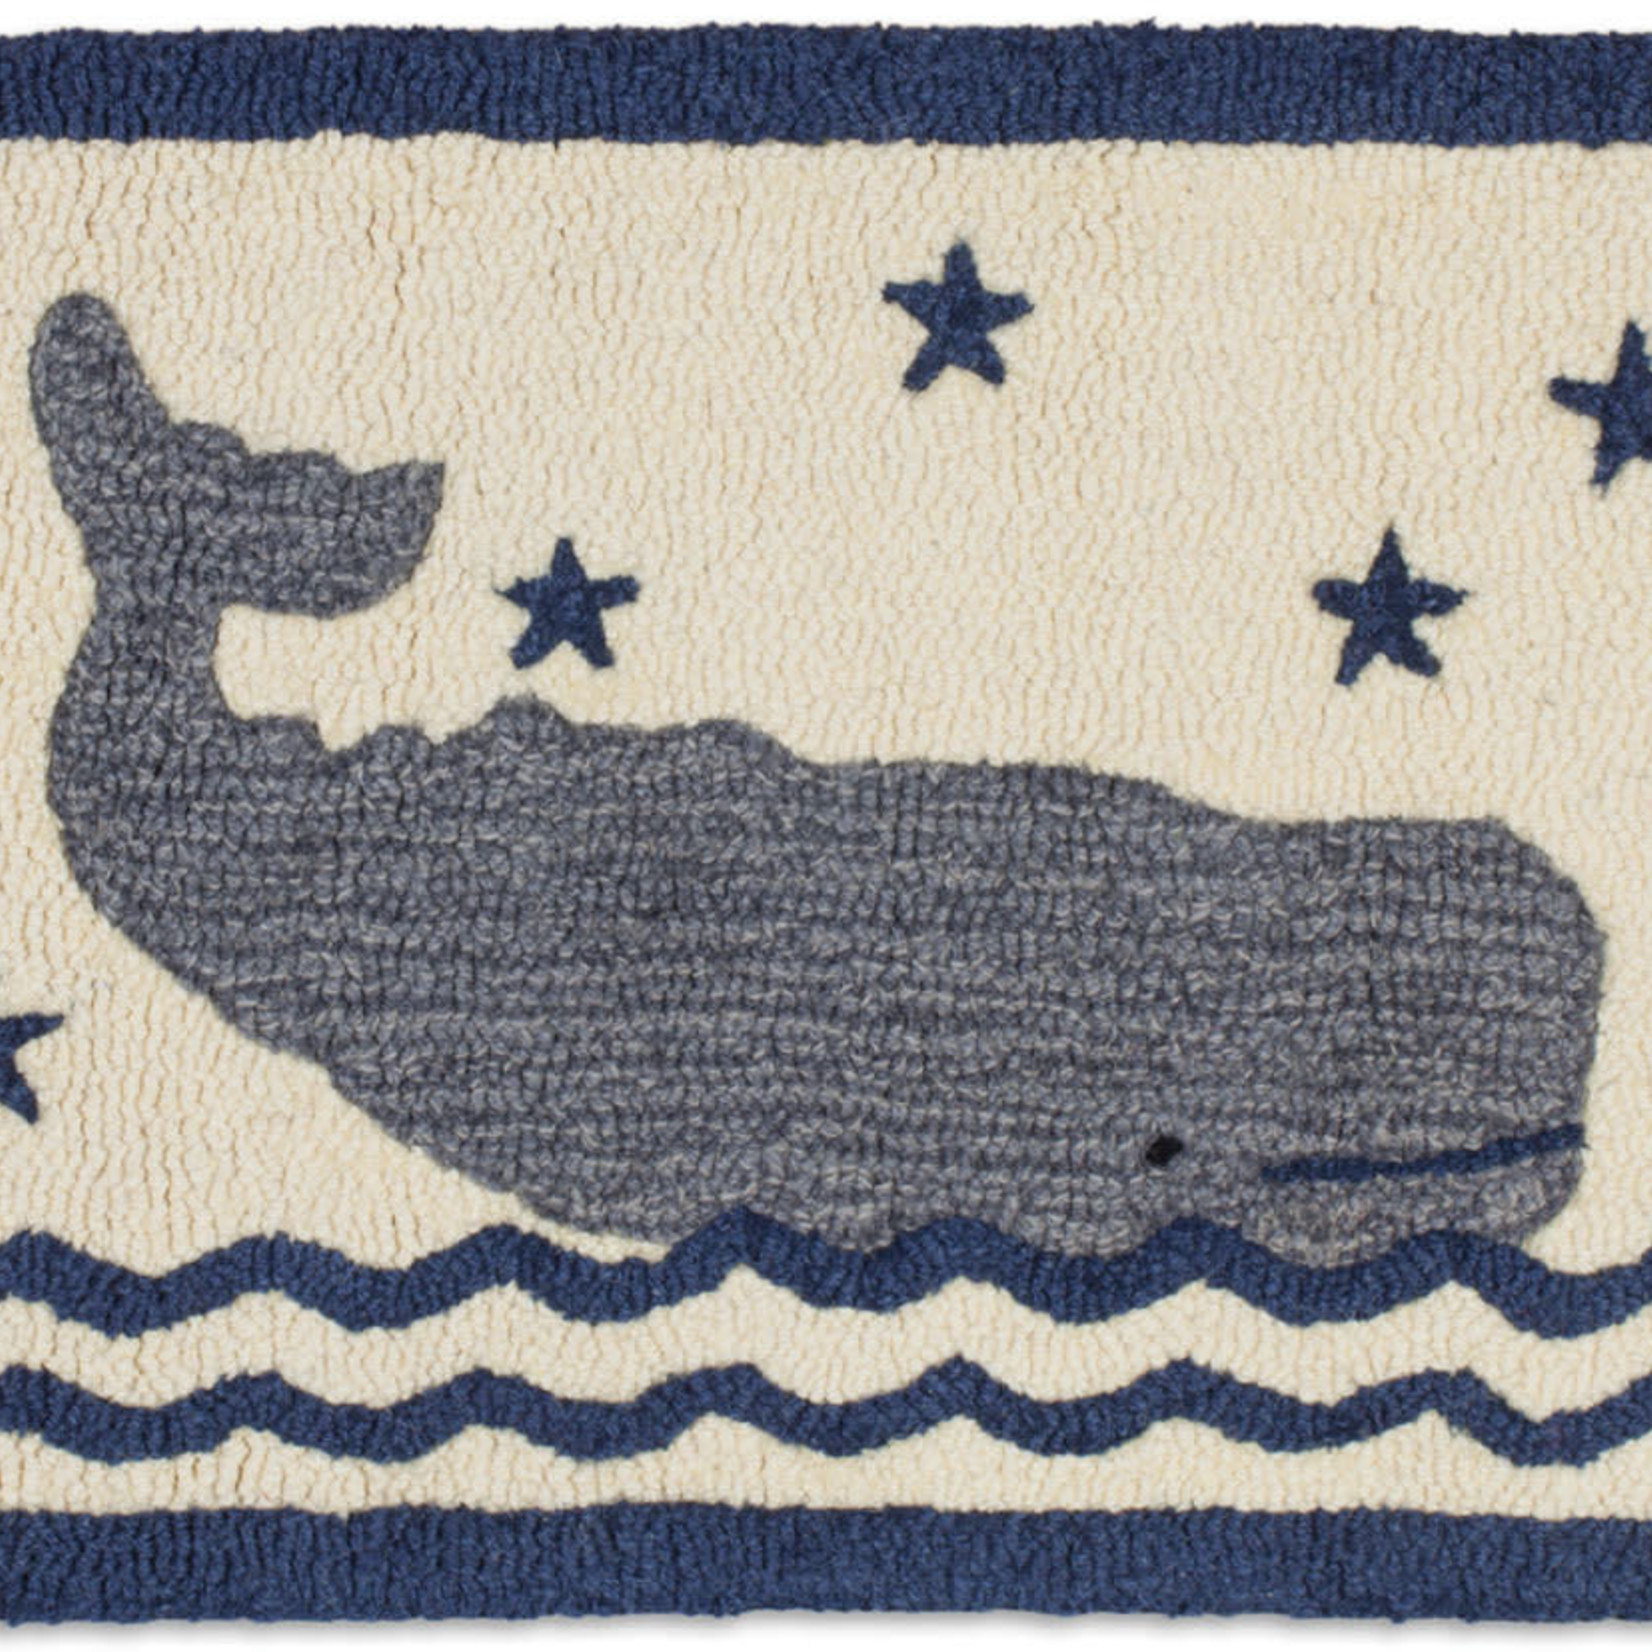 Whale In Water 20x30 Rug